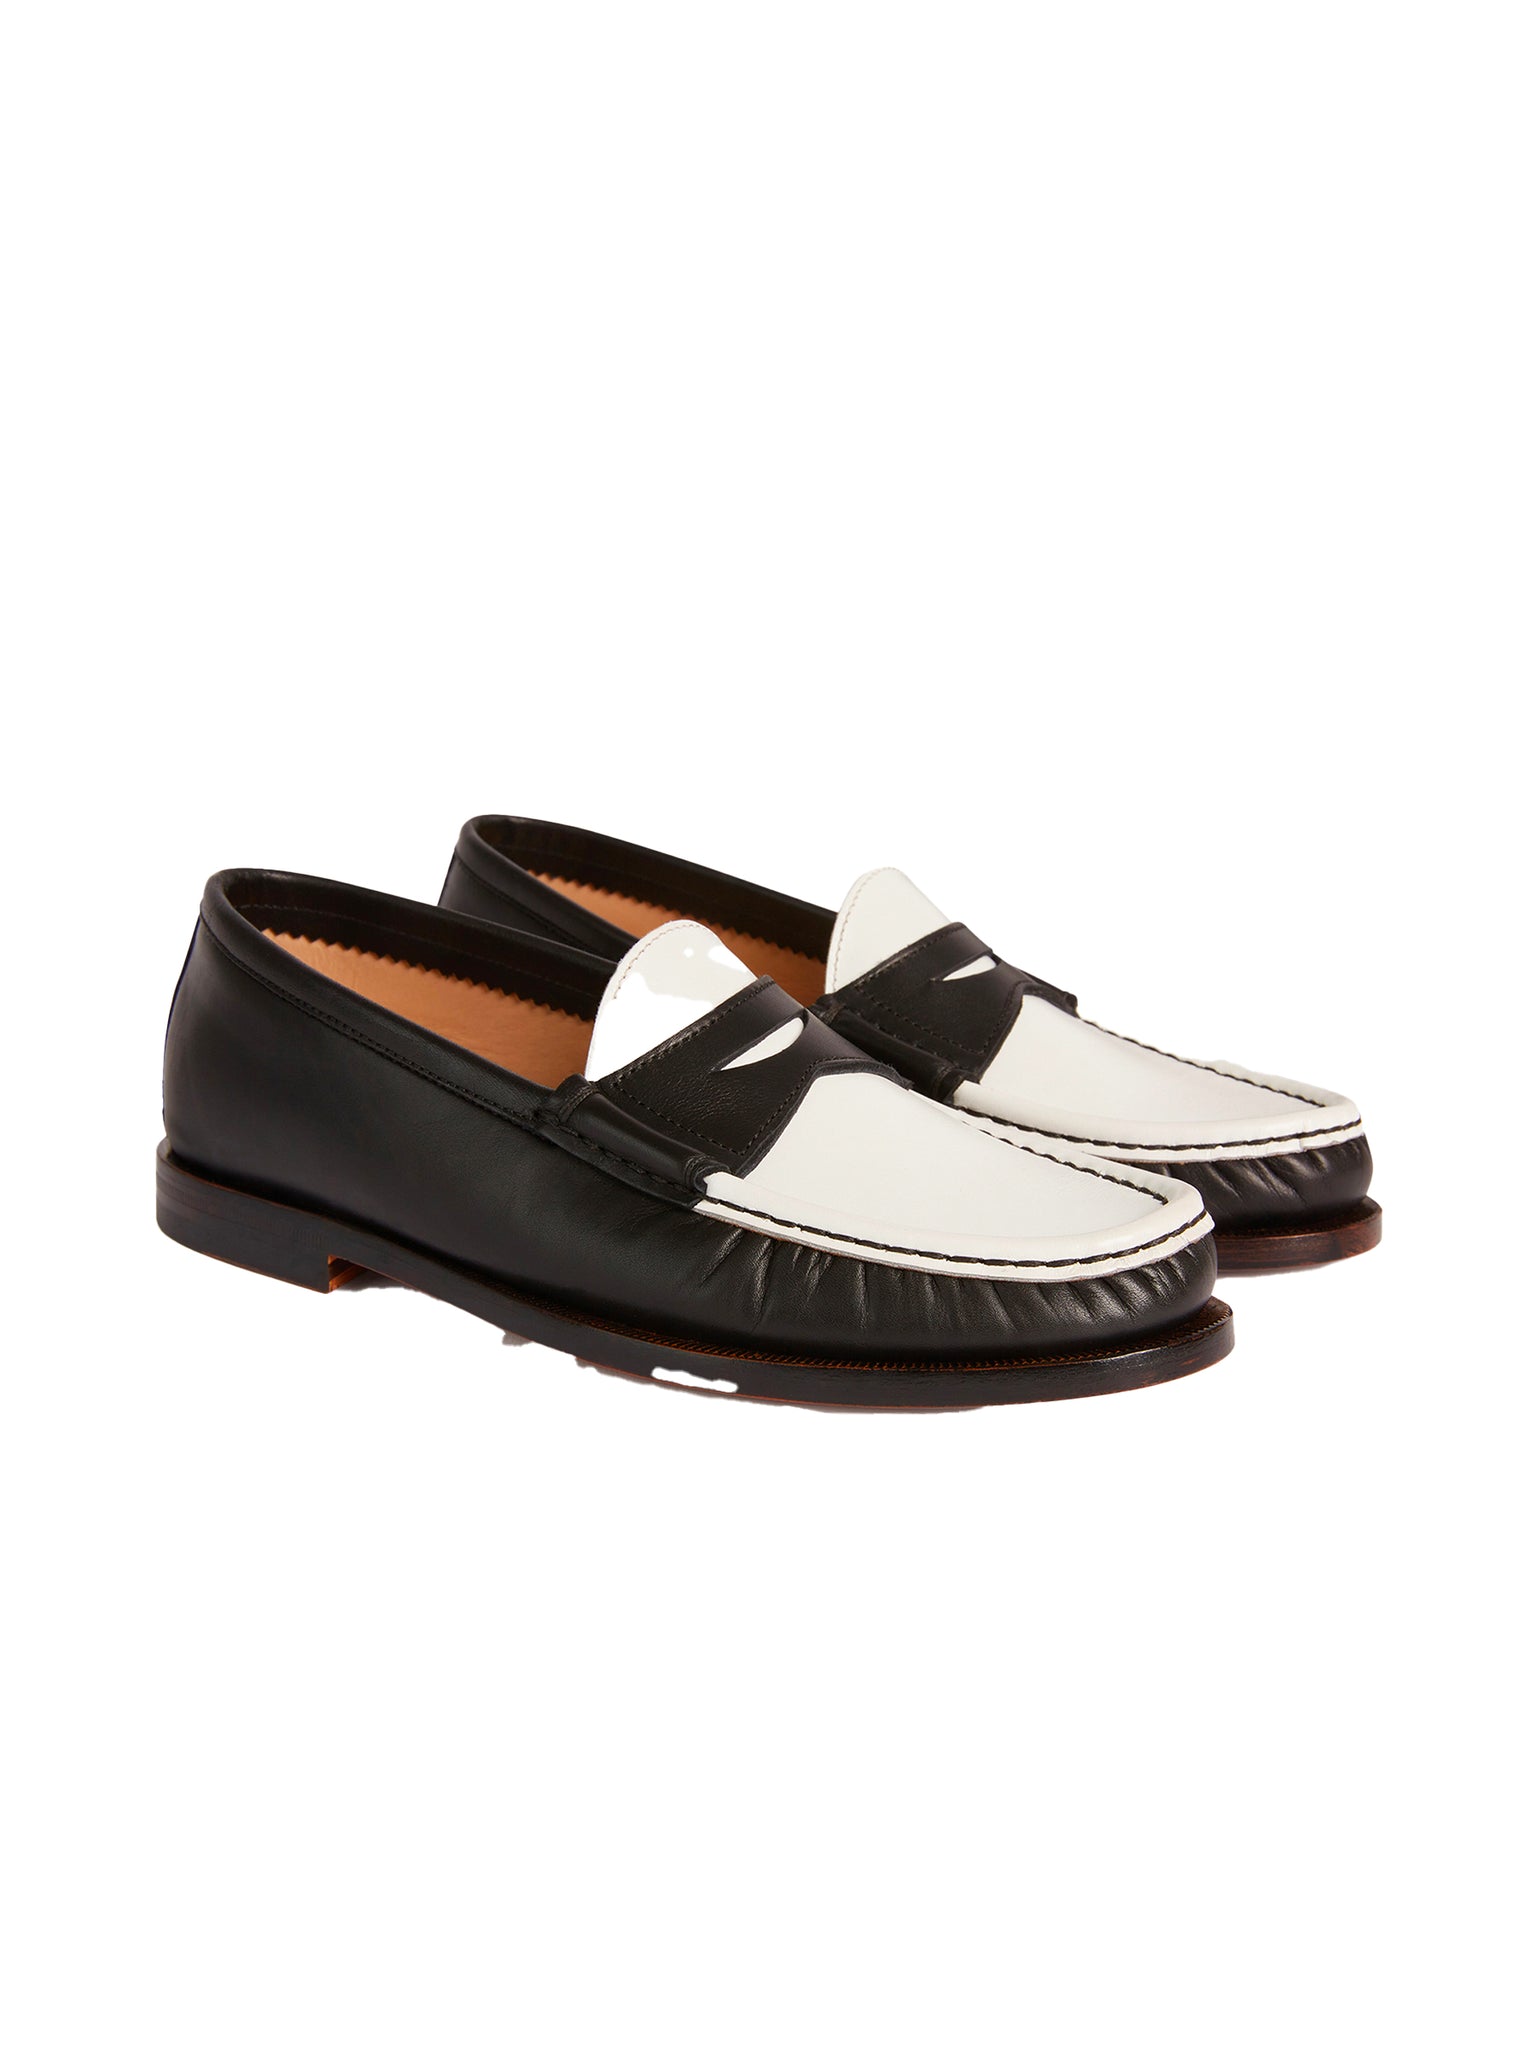 Penny loafers	Canoccial	Black & White